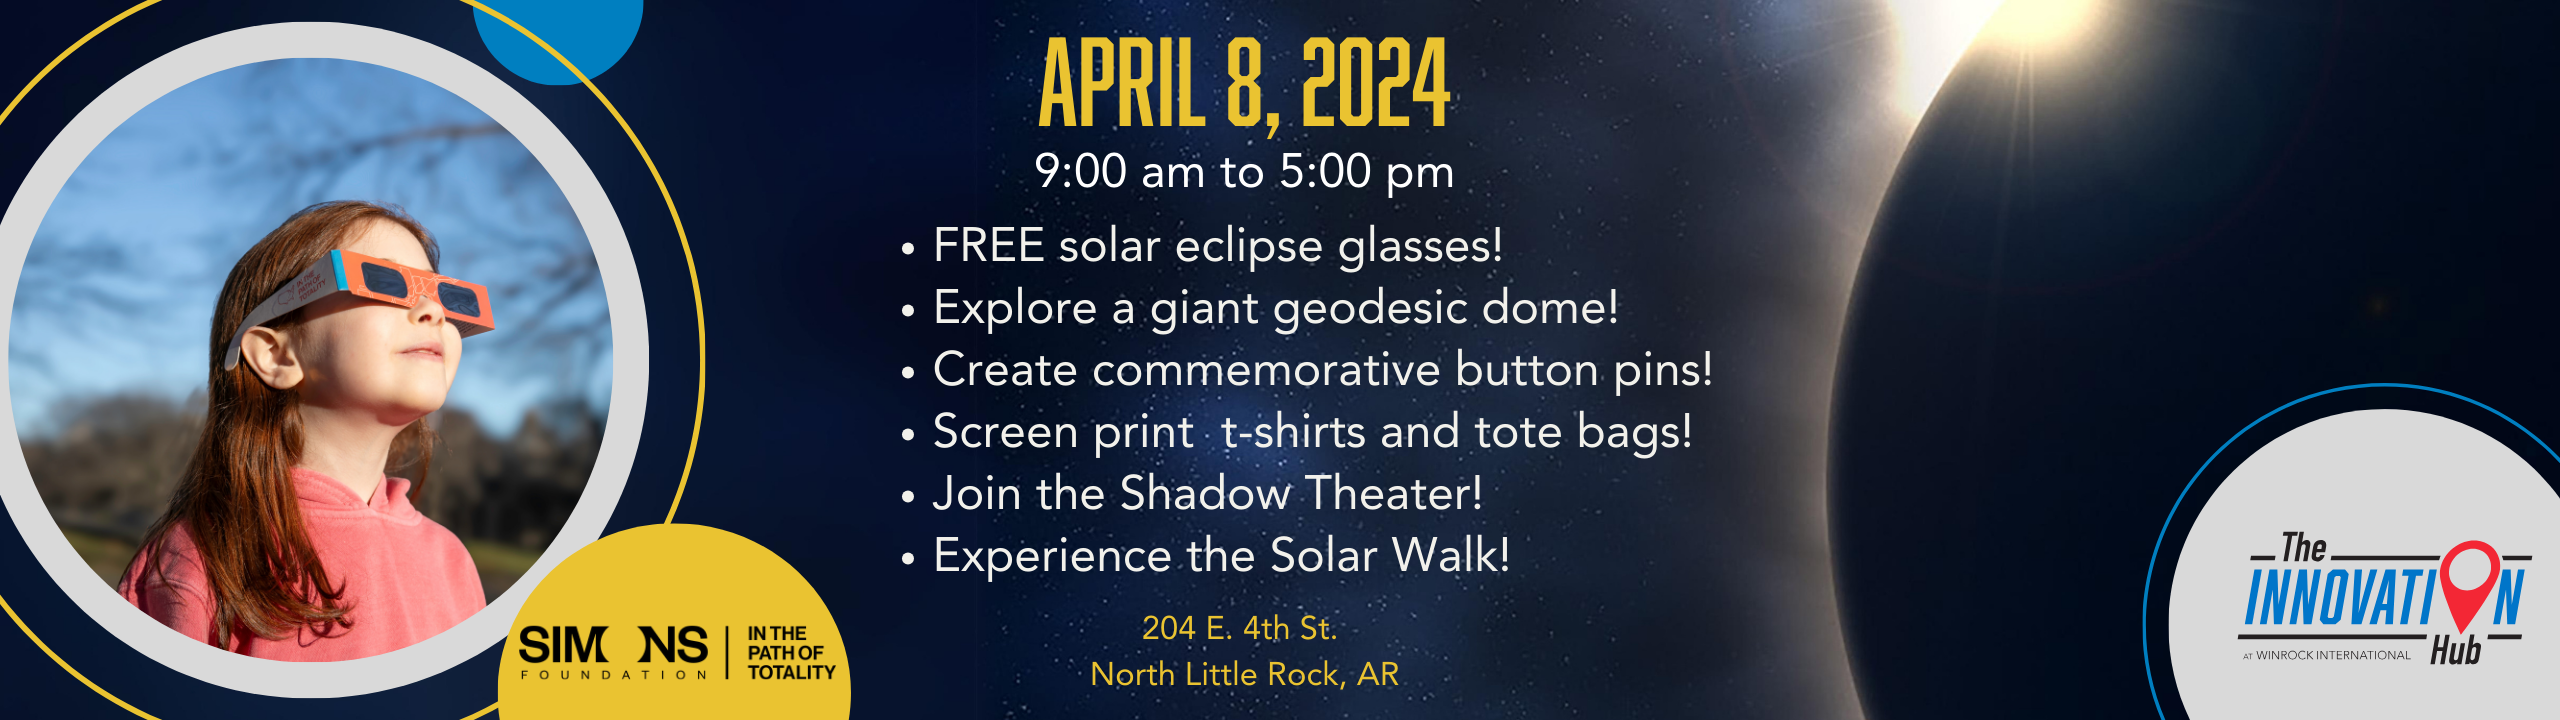 A young girl wearing solar eclipse viewing glasses looks up at the sky. Family Friendly Activities are listed.